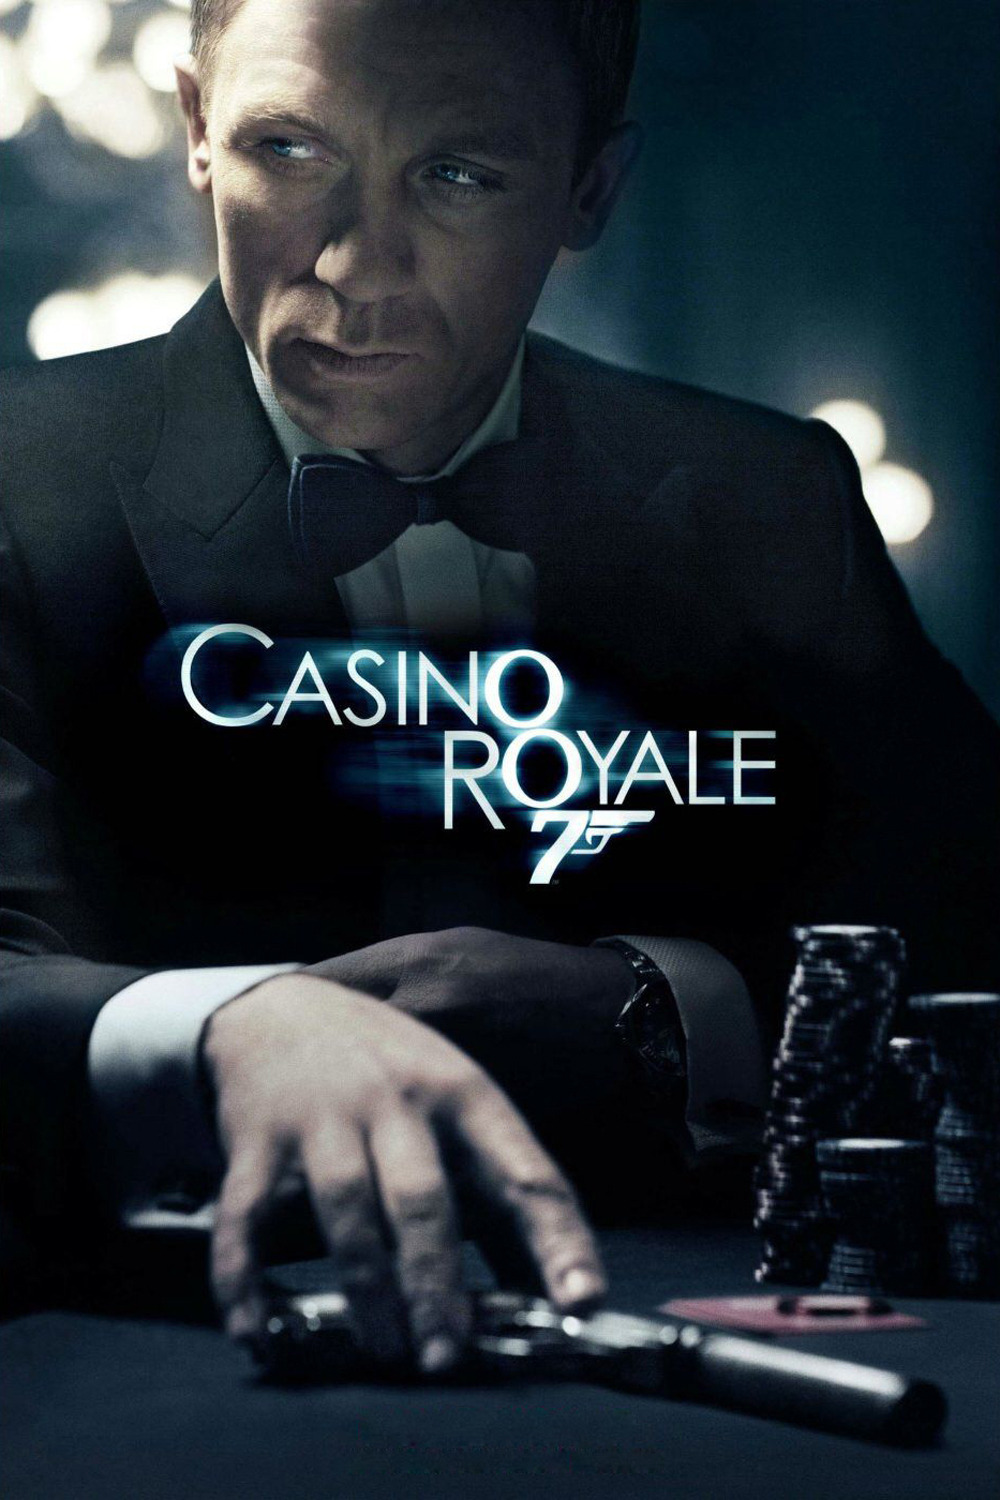 Casino royale 2006 title song chords